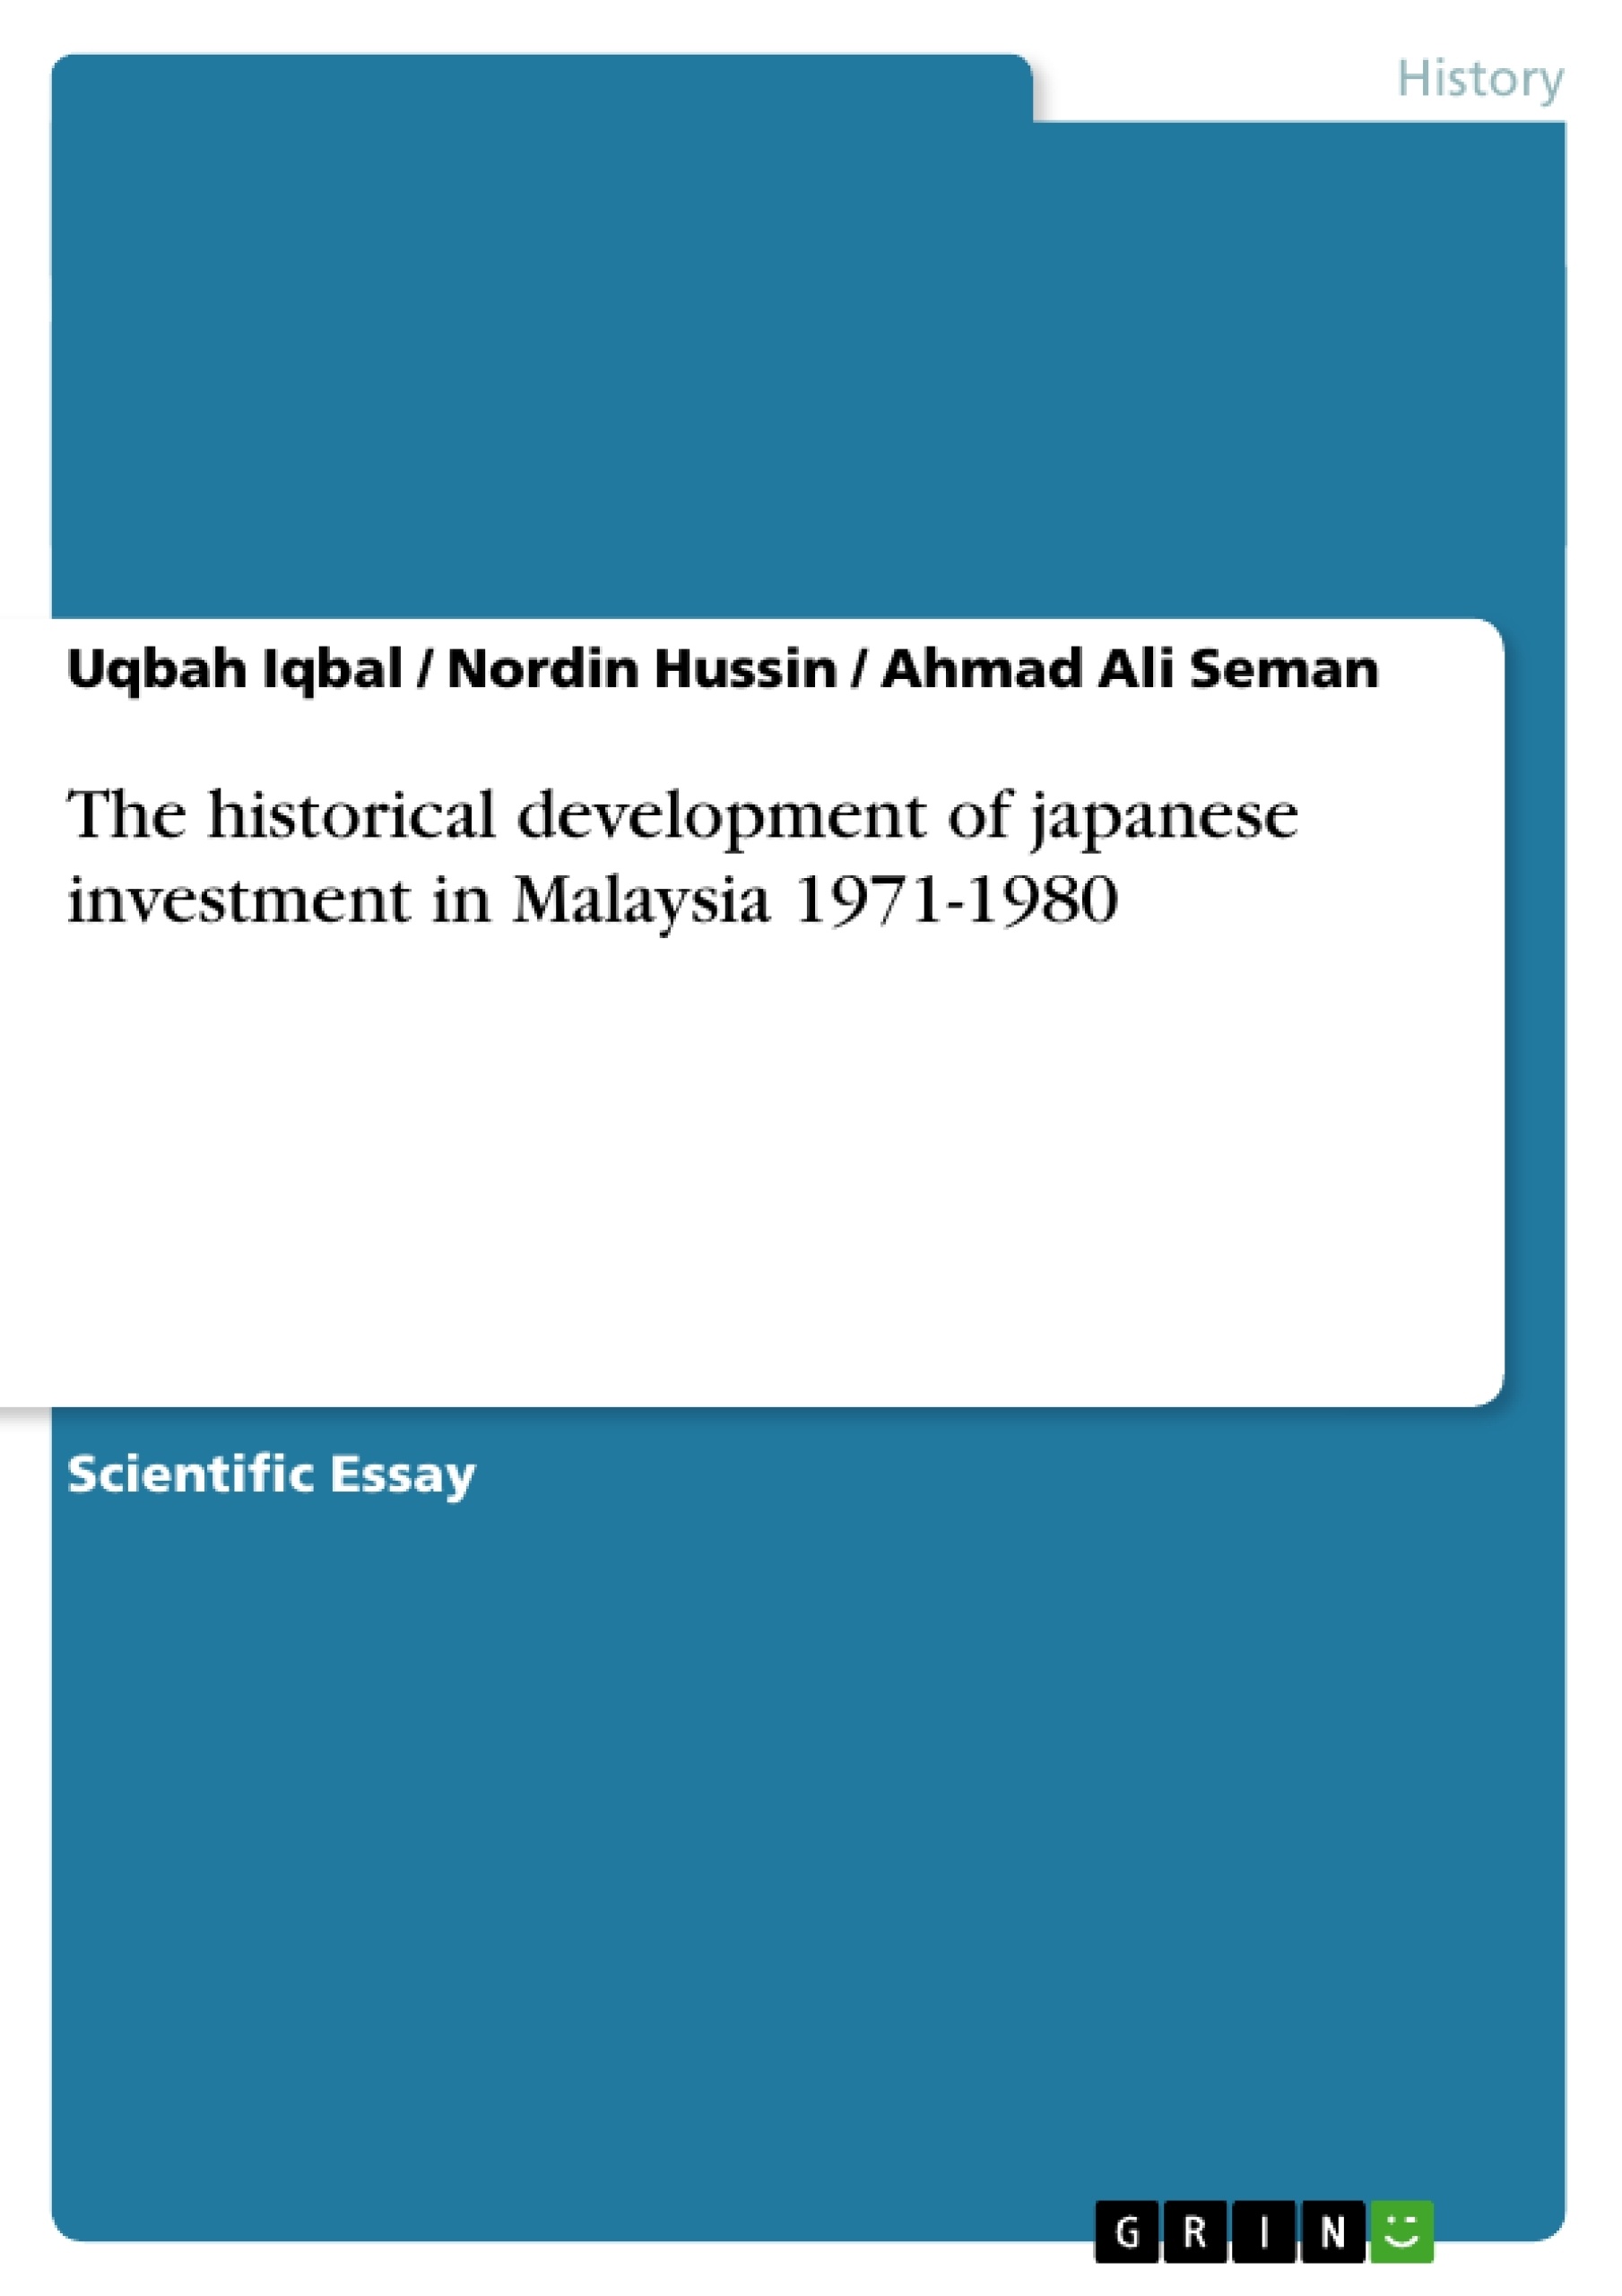 Titre: The historical development of japanese investment in Malaysia 1971-1980